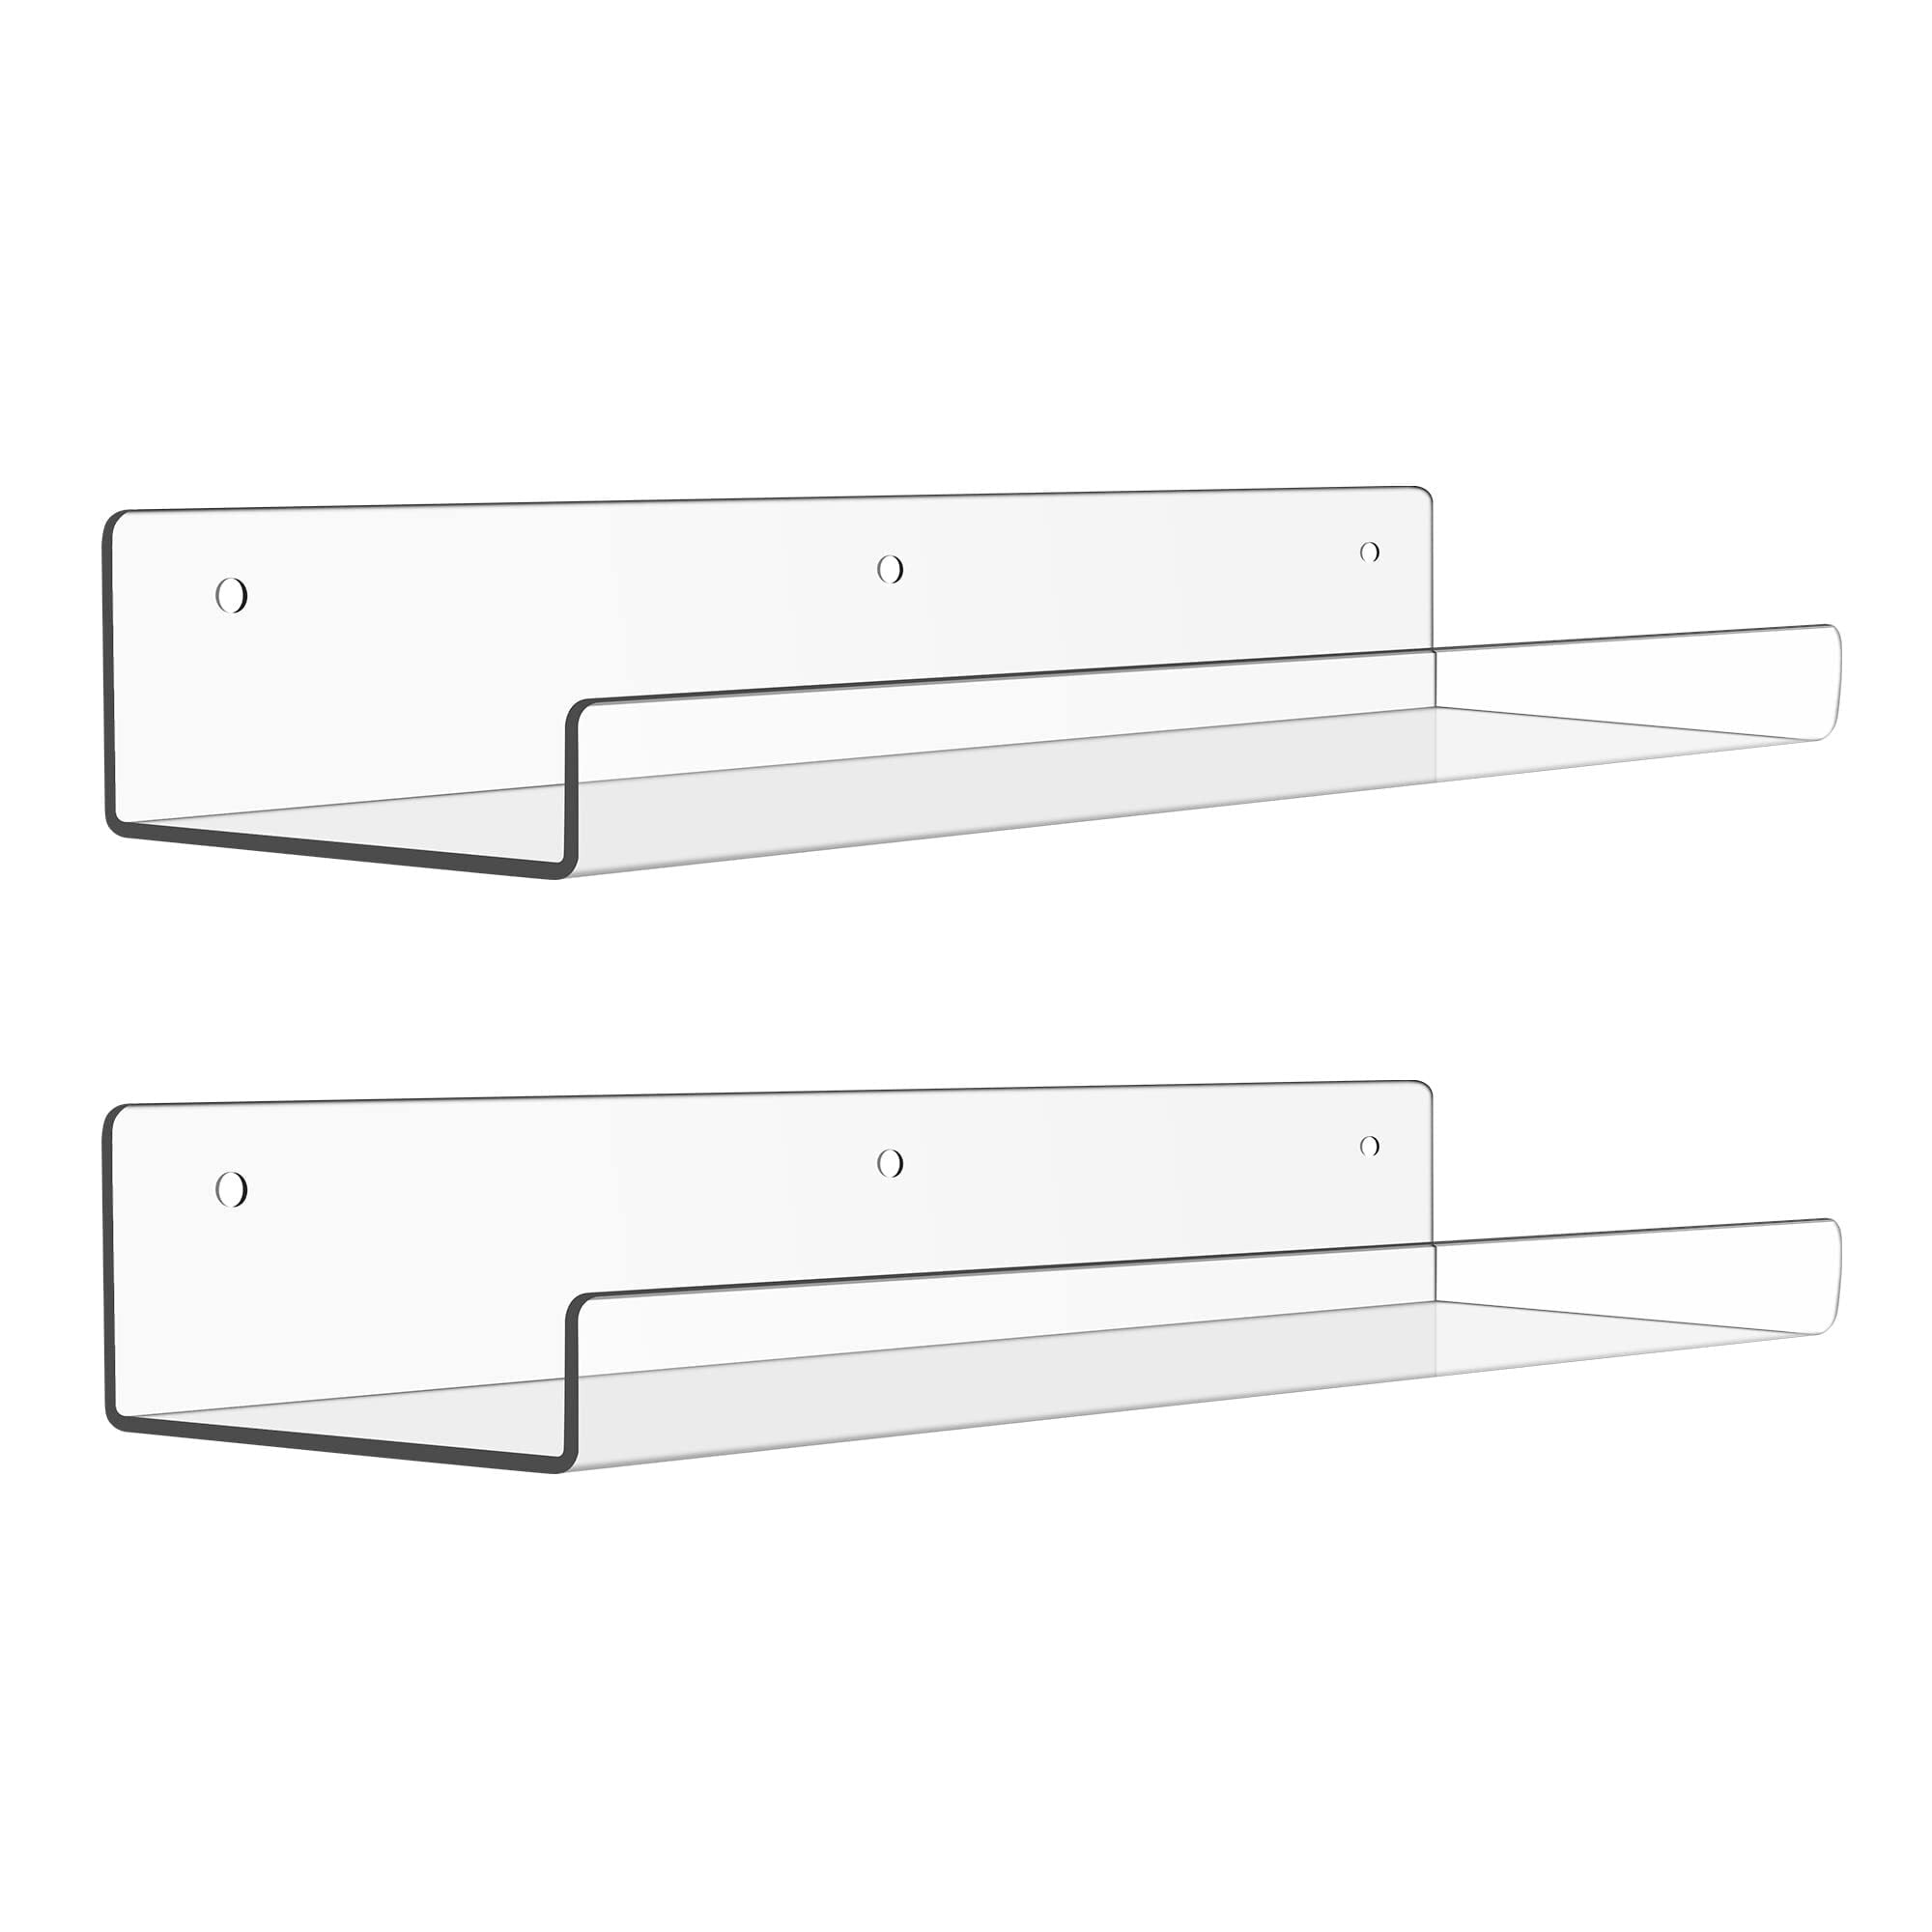 upsimples Clear Acrylic Shelves for Wall Storage, 15 Acrylic